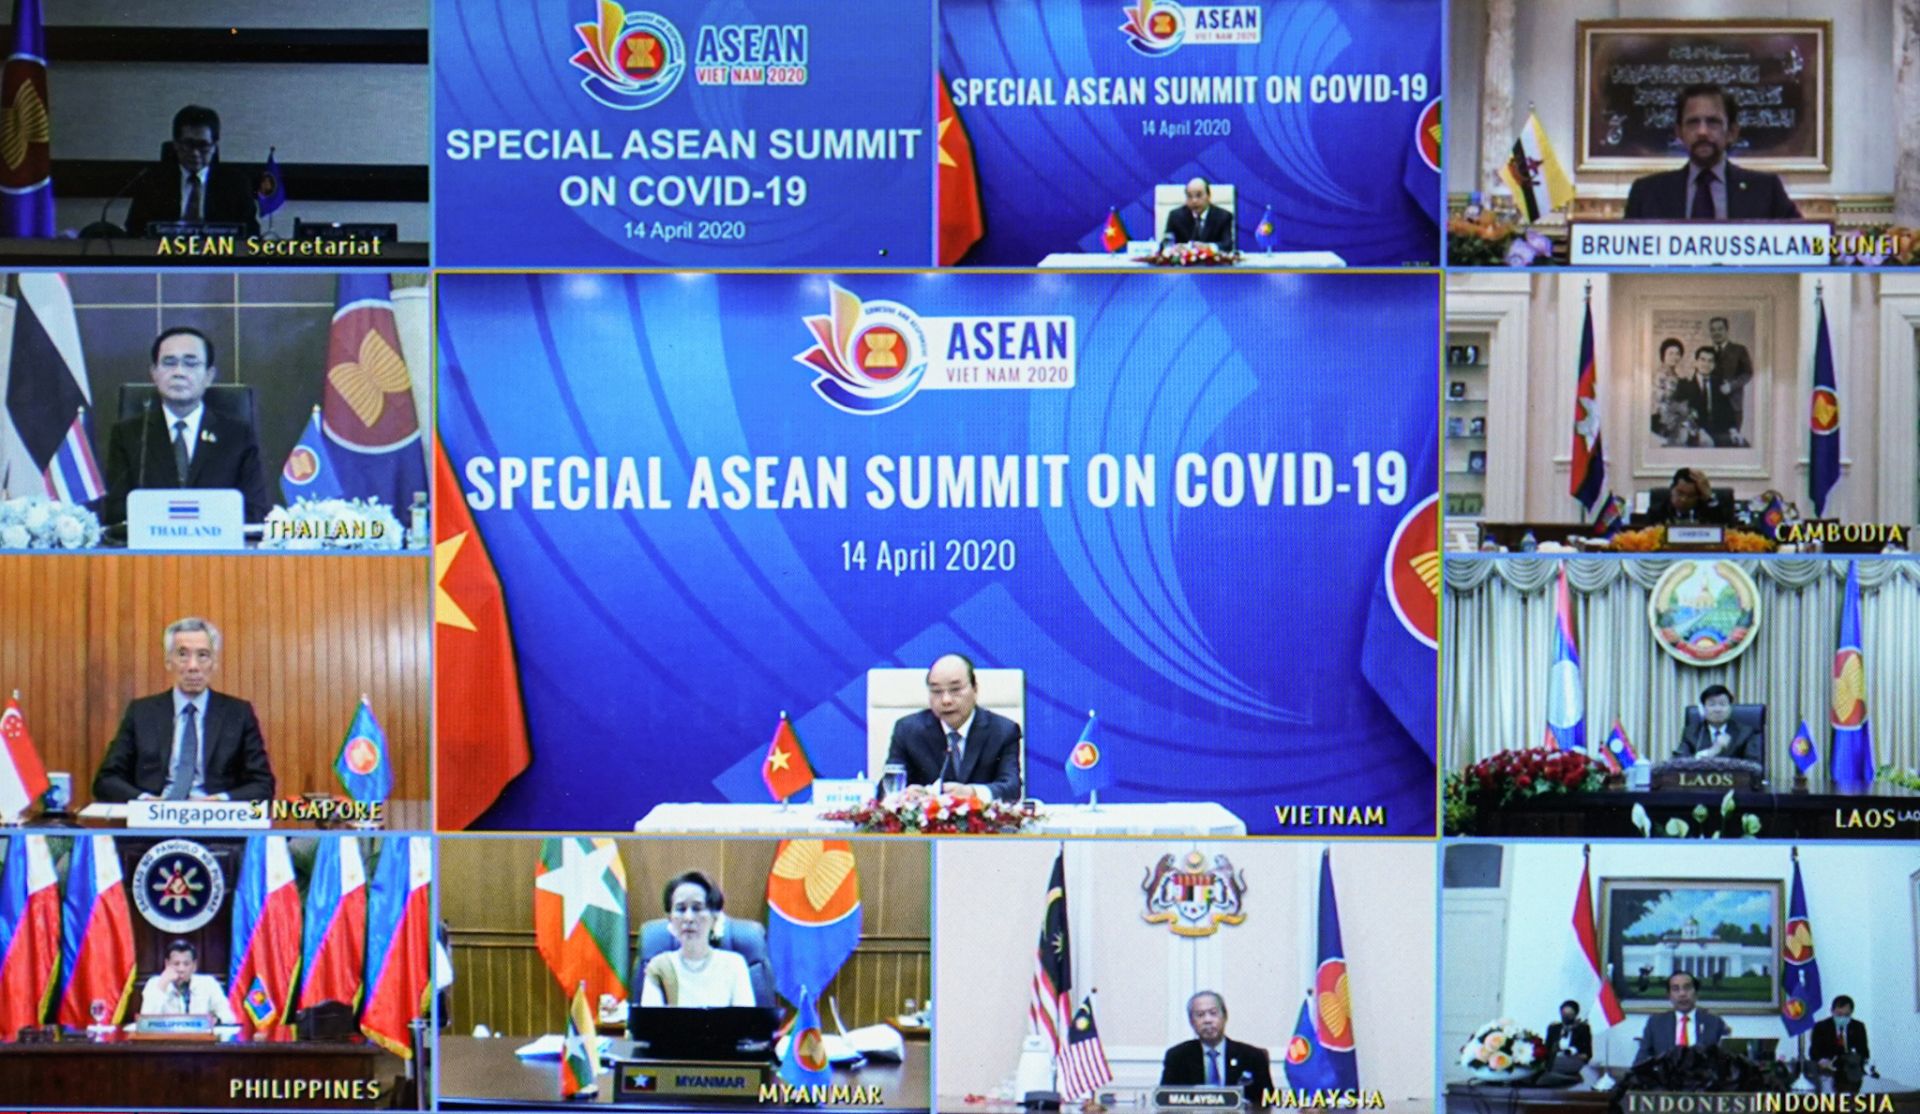 pm phuc welcomes leaders to special asean3 summit on covid 19